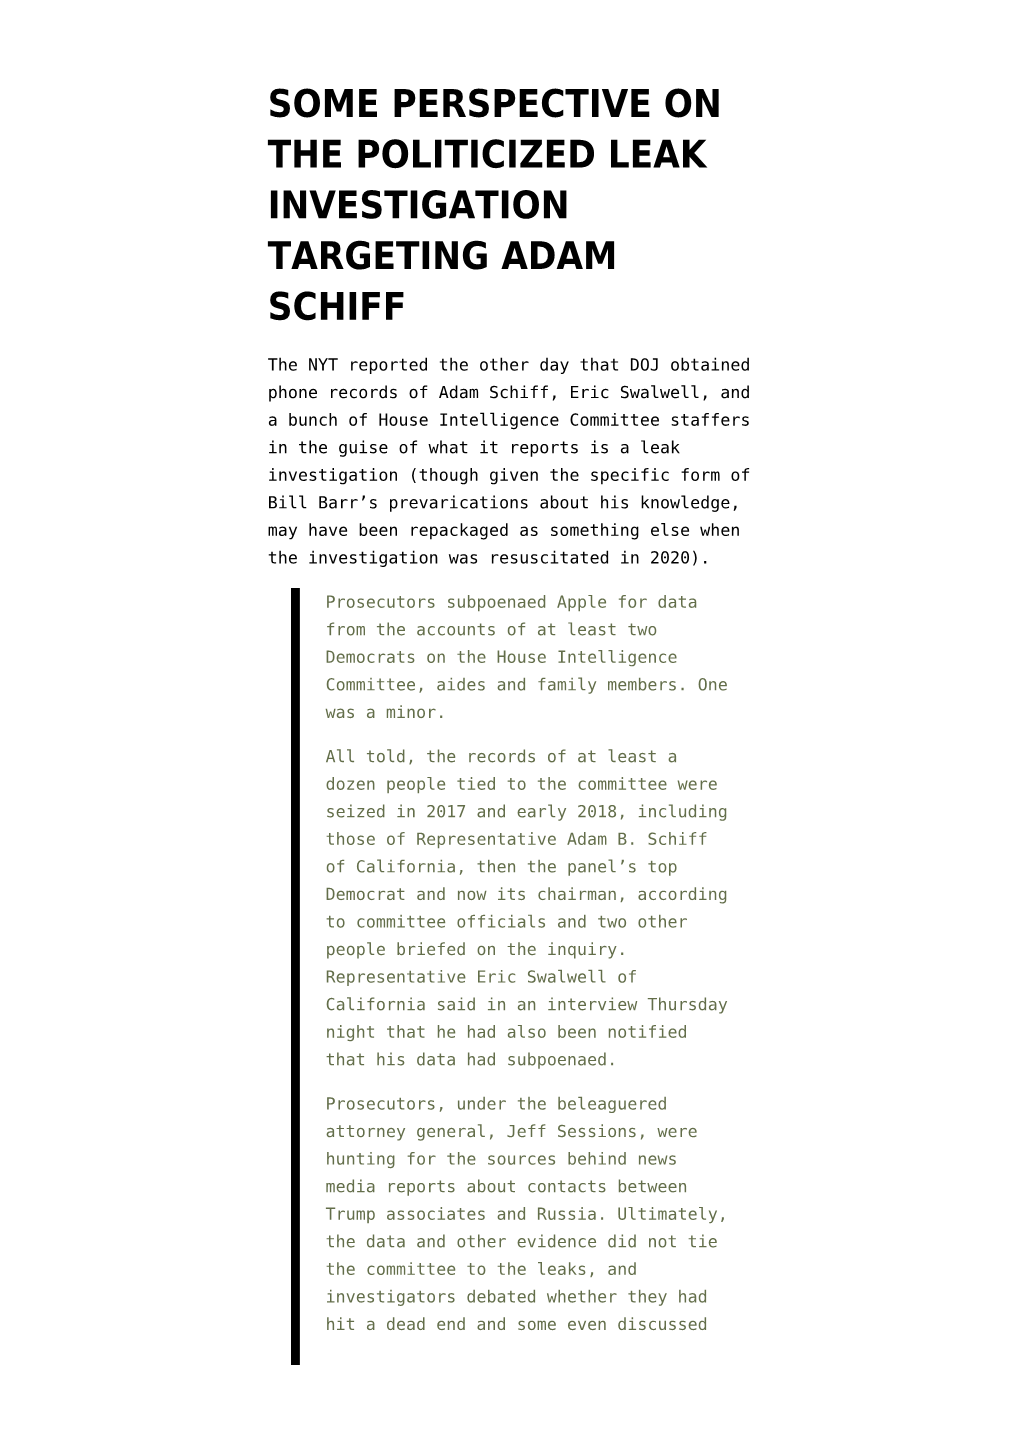 Some Perspective on the Politicized Leak Investigation Targeting Adam Schiff